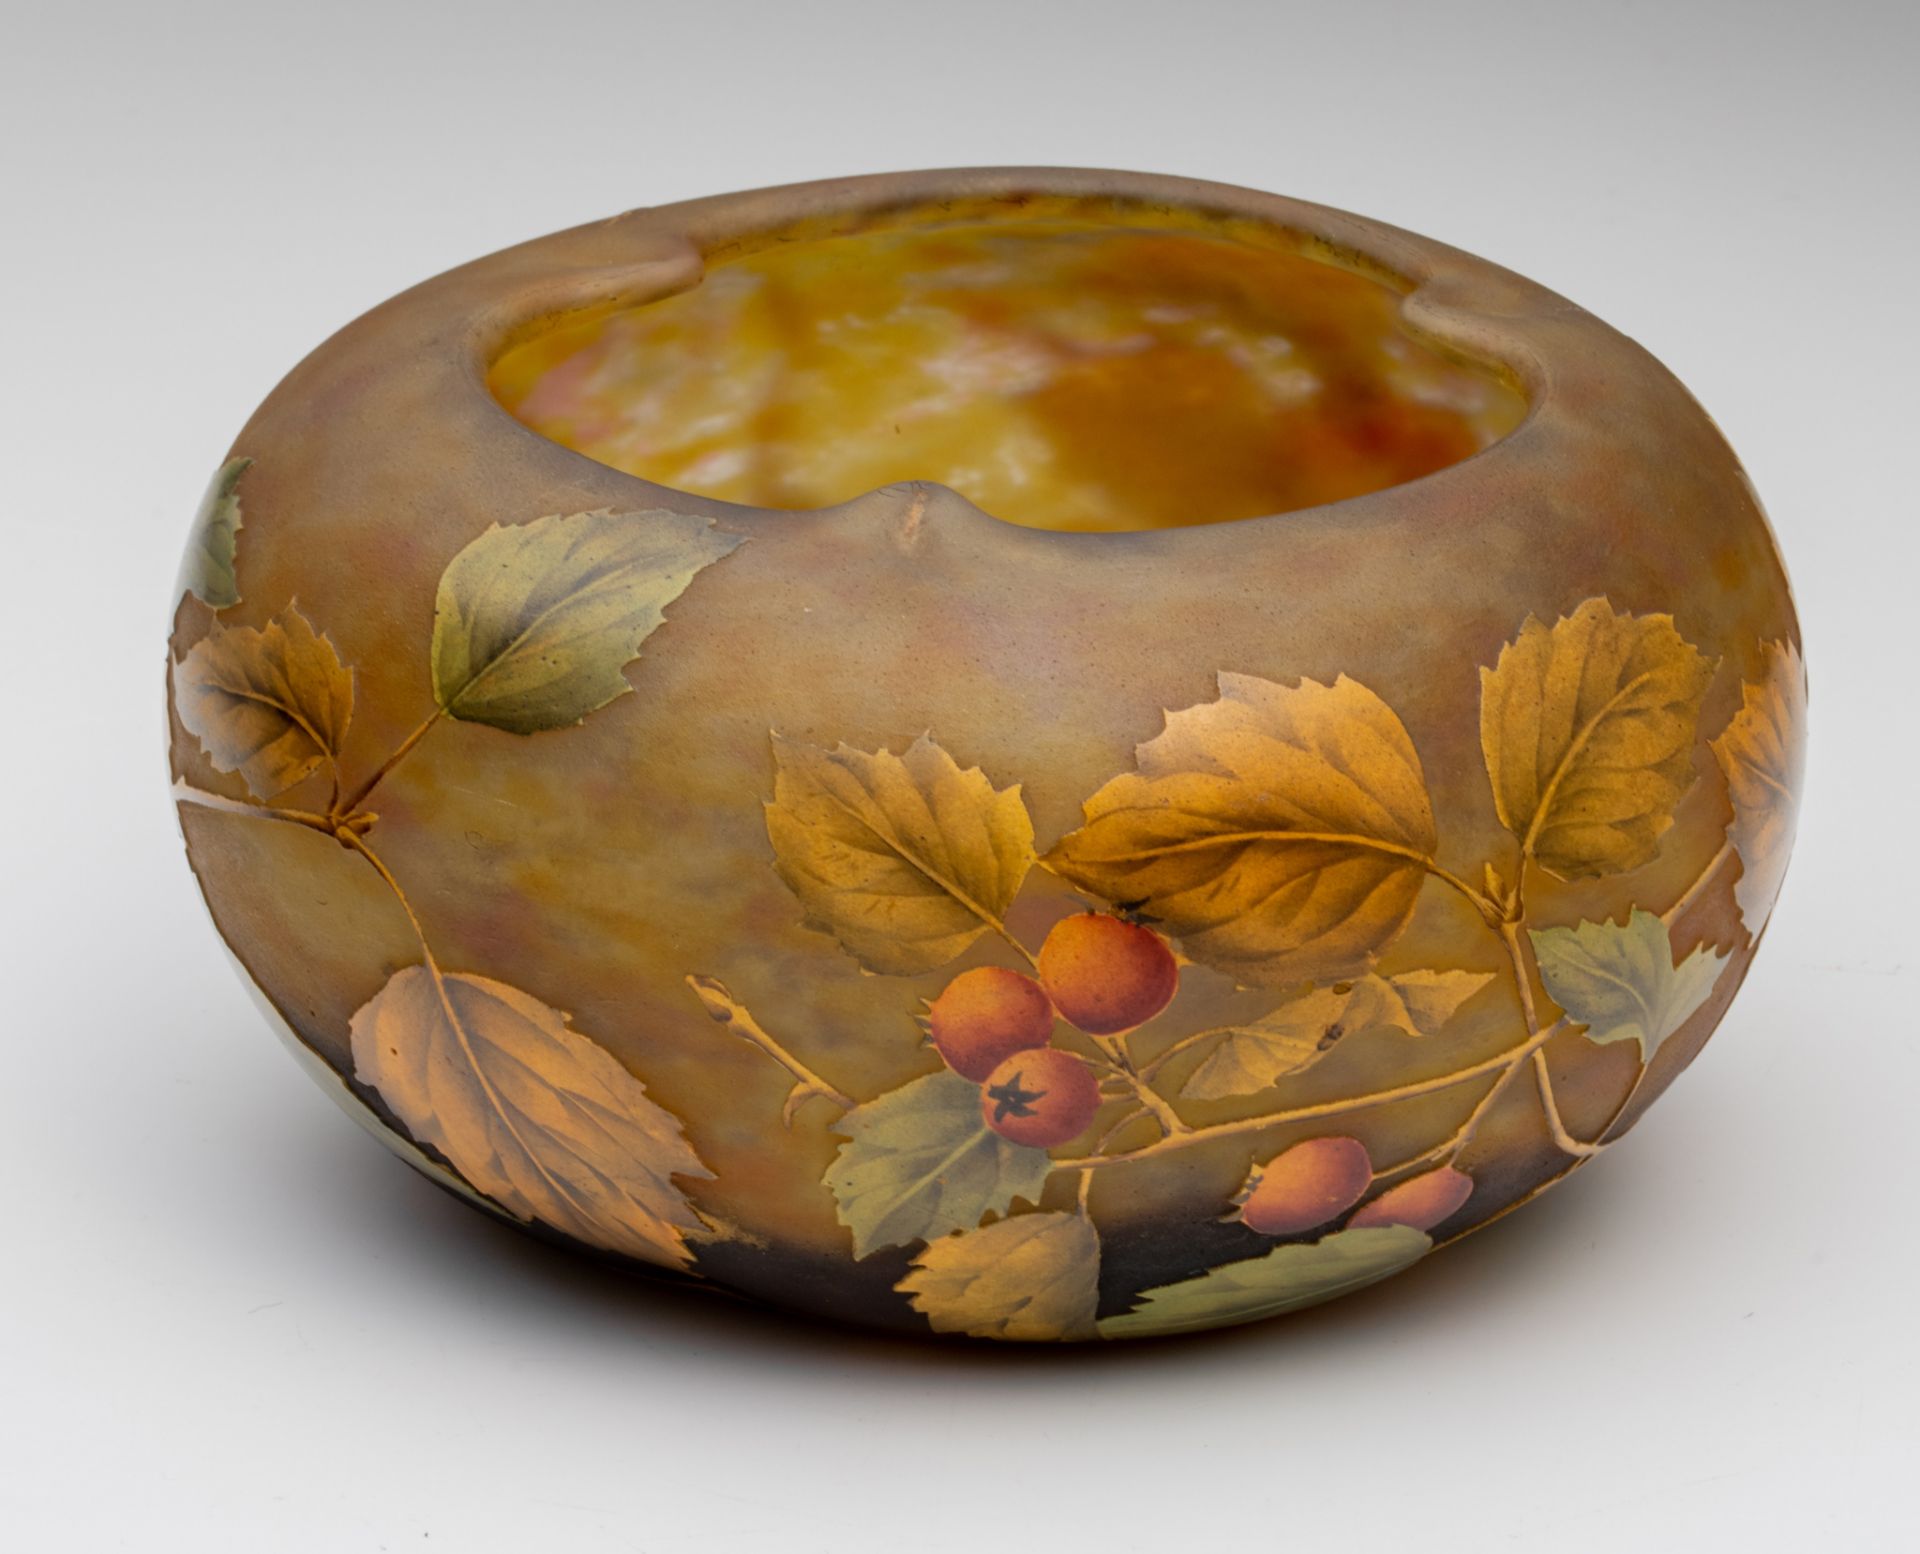 (BIDDING ONLY ON CARLOBONTE.BE) A large Art Nouveau style cameo glass paste bowl with floral decorat - Image 4 of 10